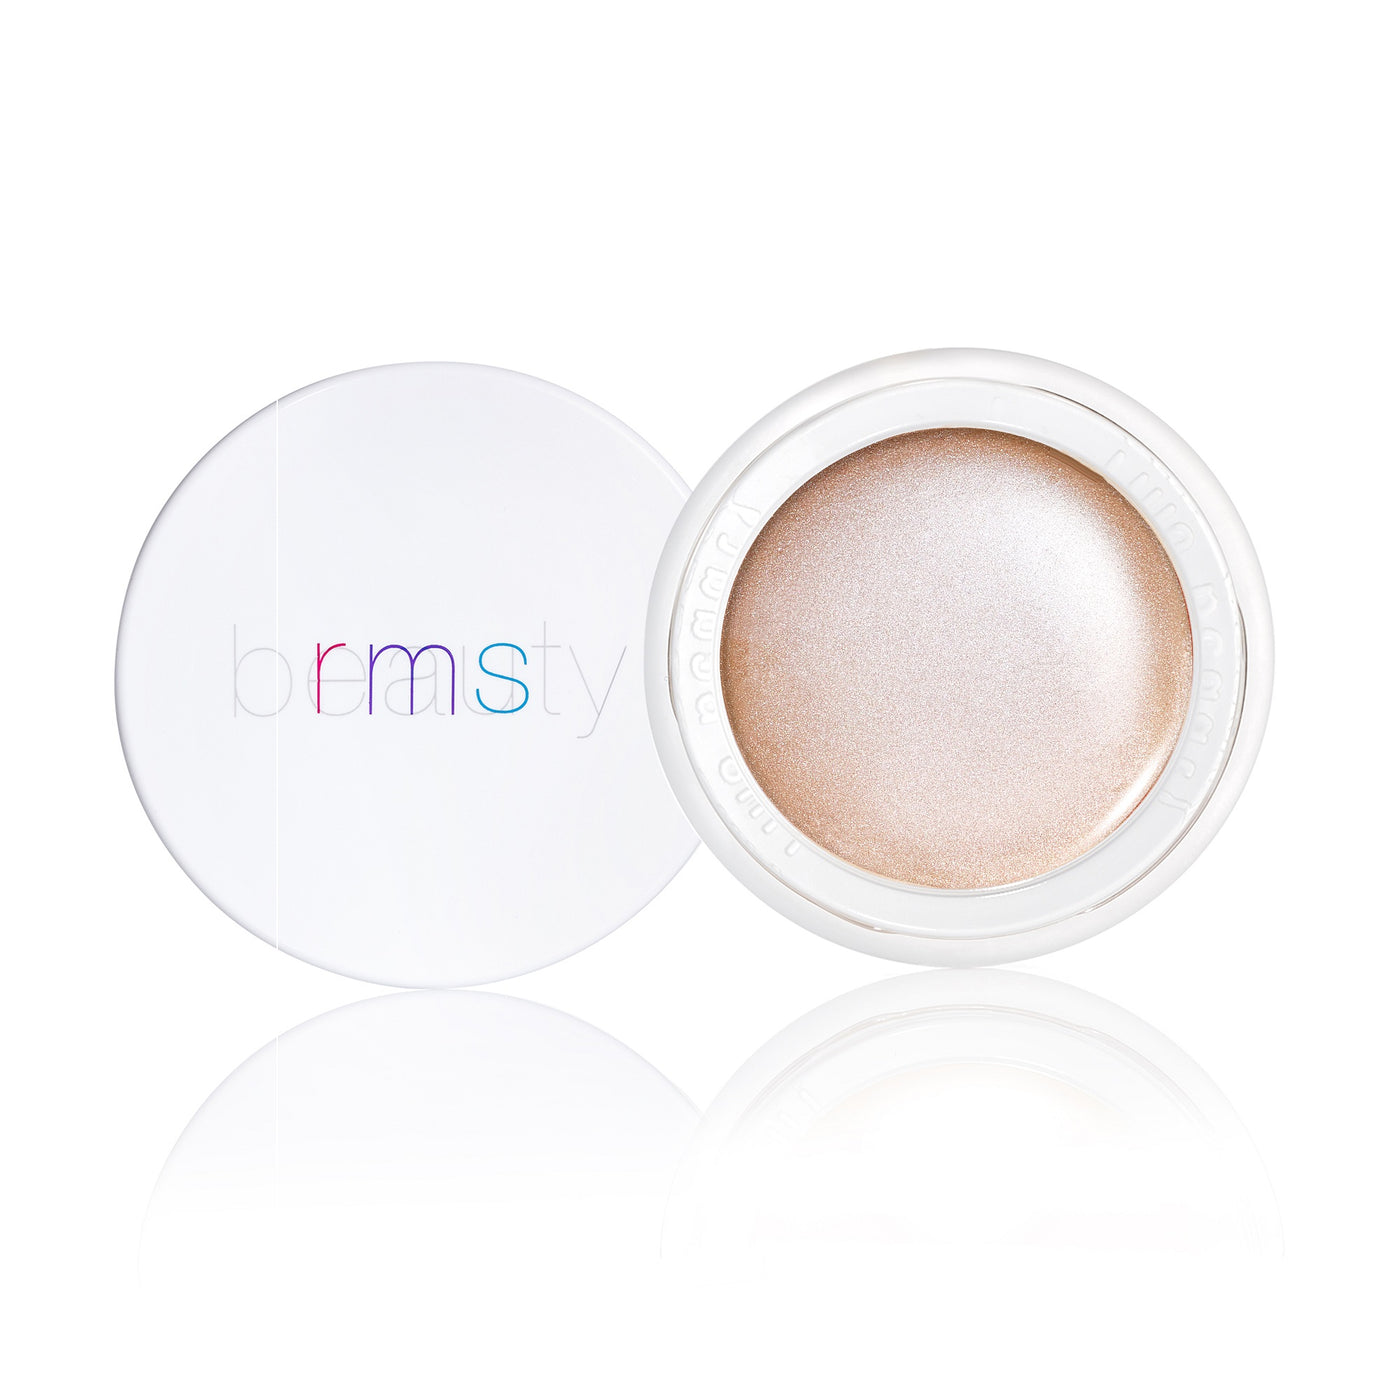 RMS Beauty Champagne Rose Luminizer